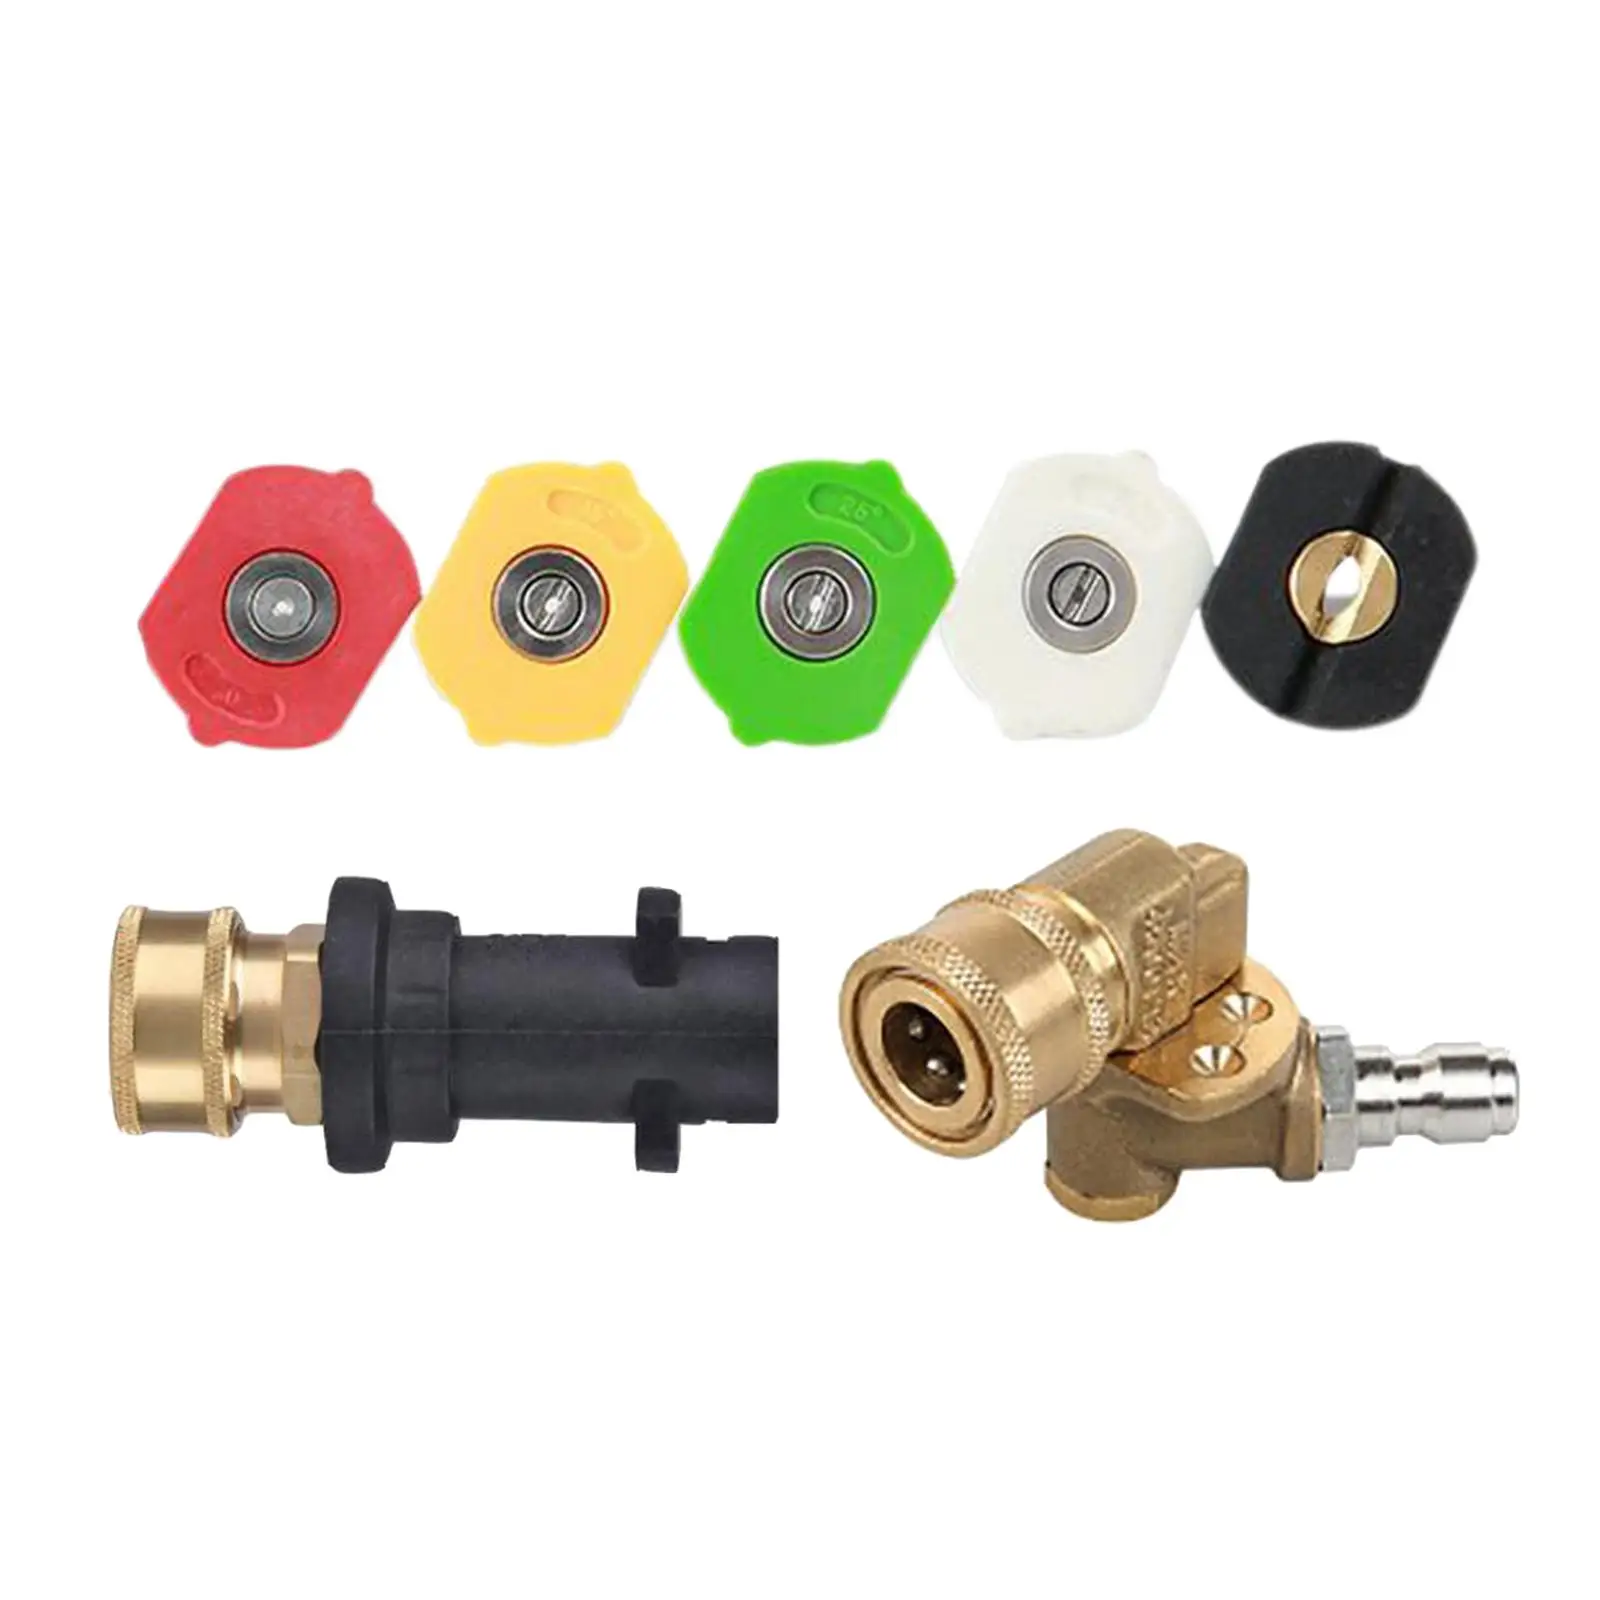 

Pressure Washer Adapter Set 5000PSI Pressure 7 Gear Connector Premium 1/4'' Quick Connector Set for Garden Plant Watering